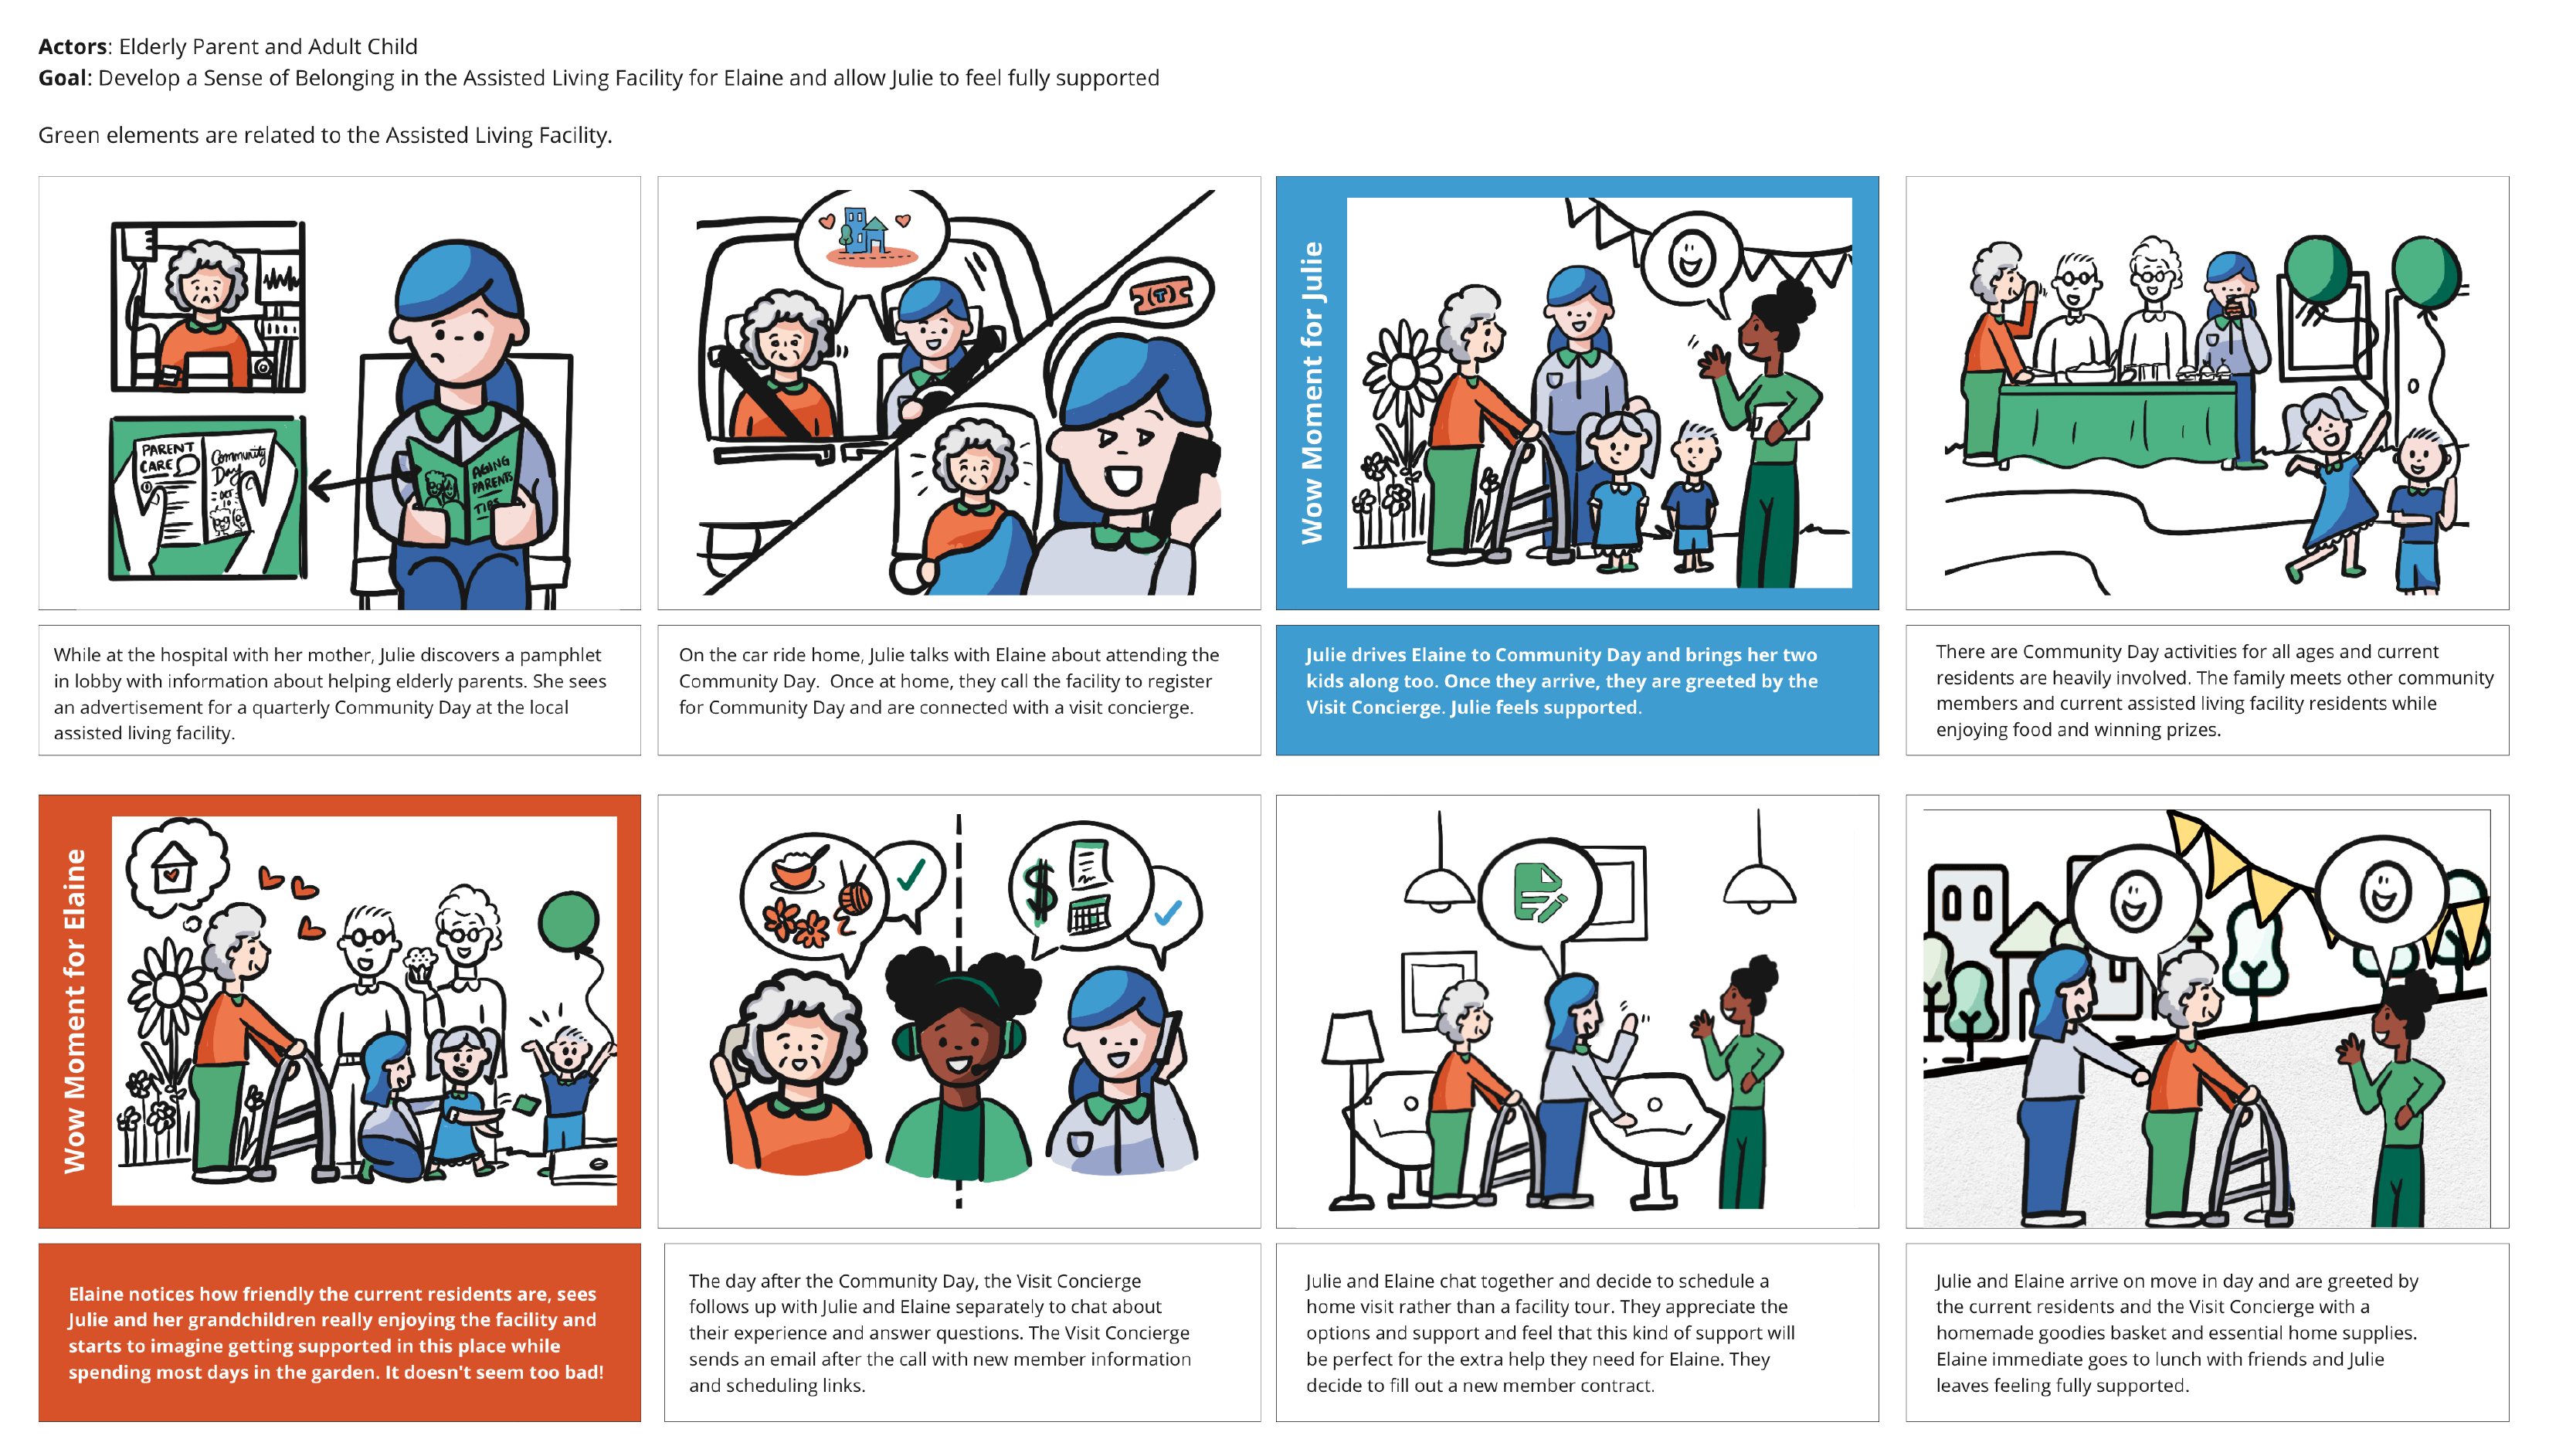 storyboard depicting the customer's ideal experience being introduced to the assisted living facility at an event guided by a concierge